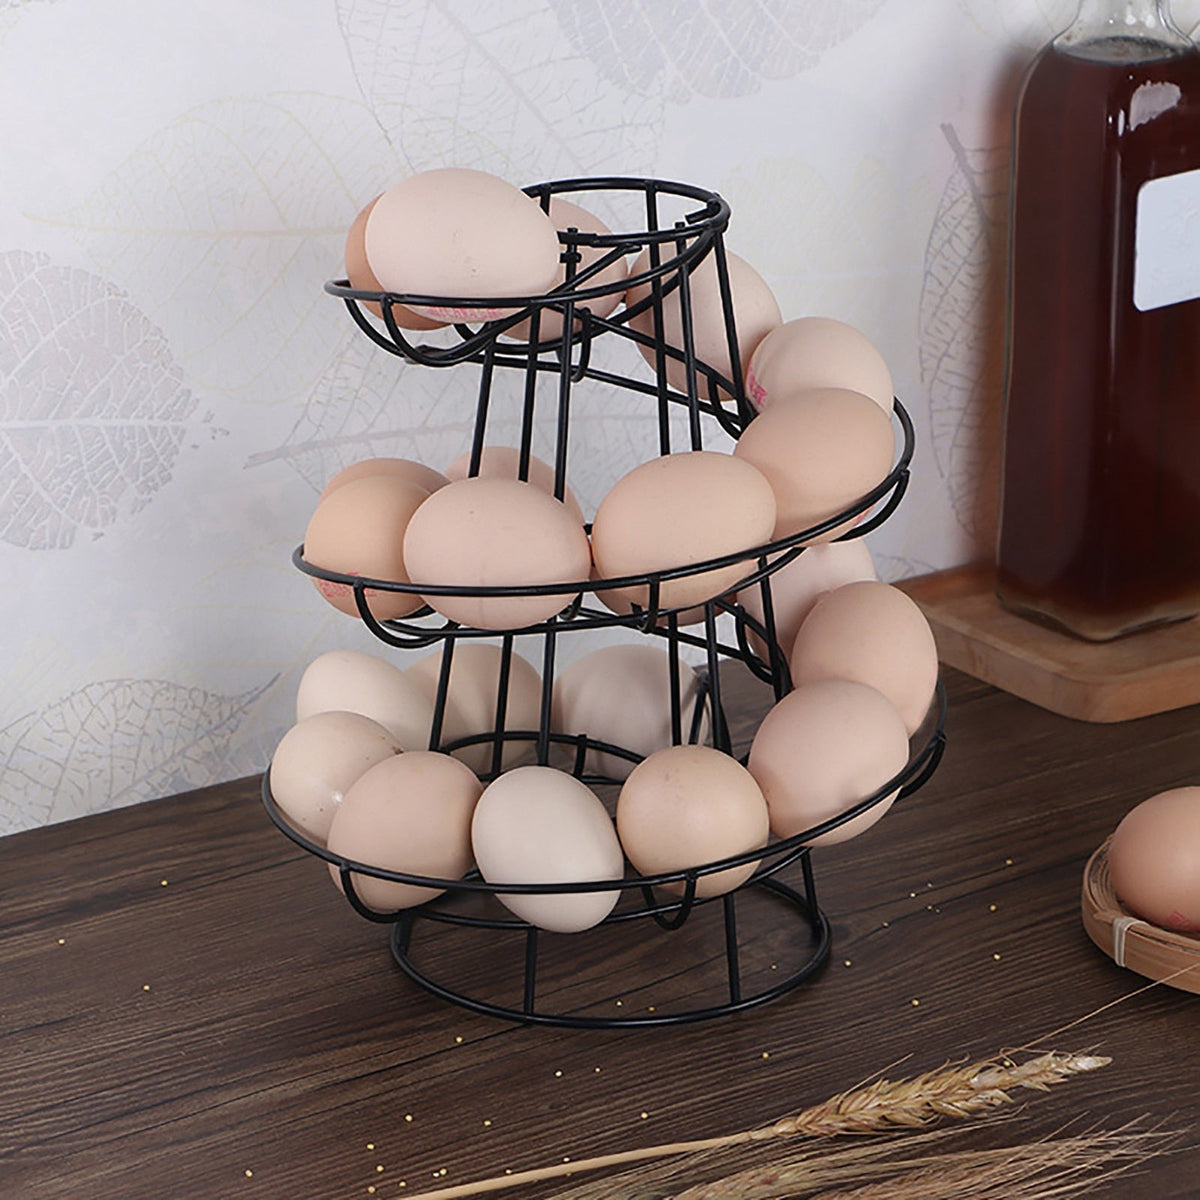 Iron Spiral Egg Holder - 4 different colors – MIP - Minimal Impact Products